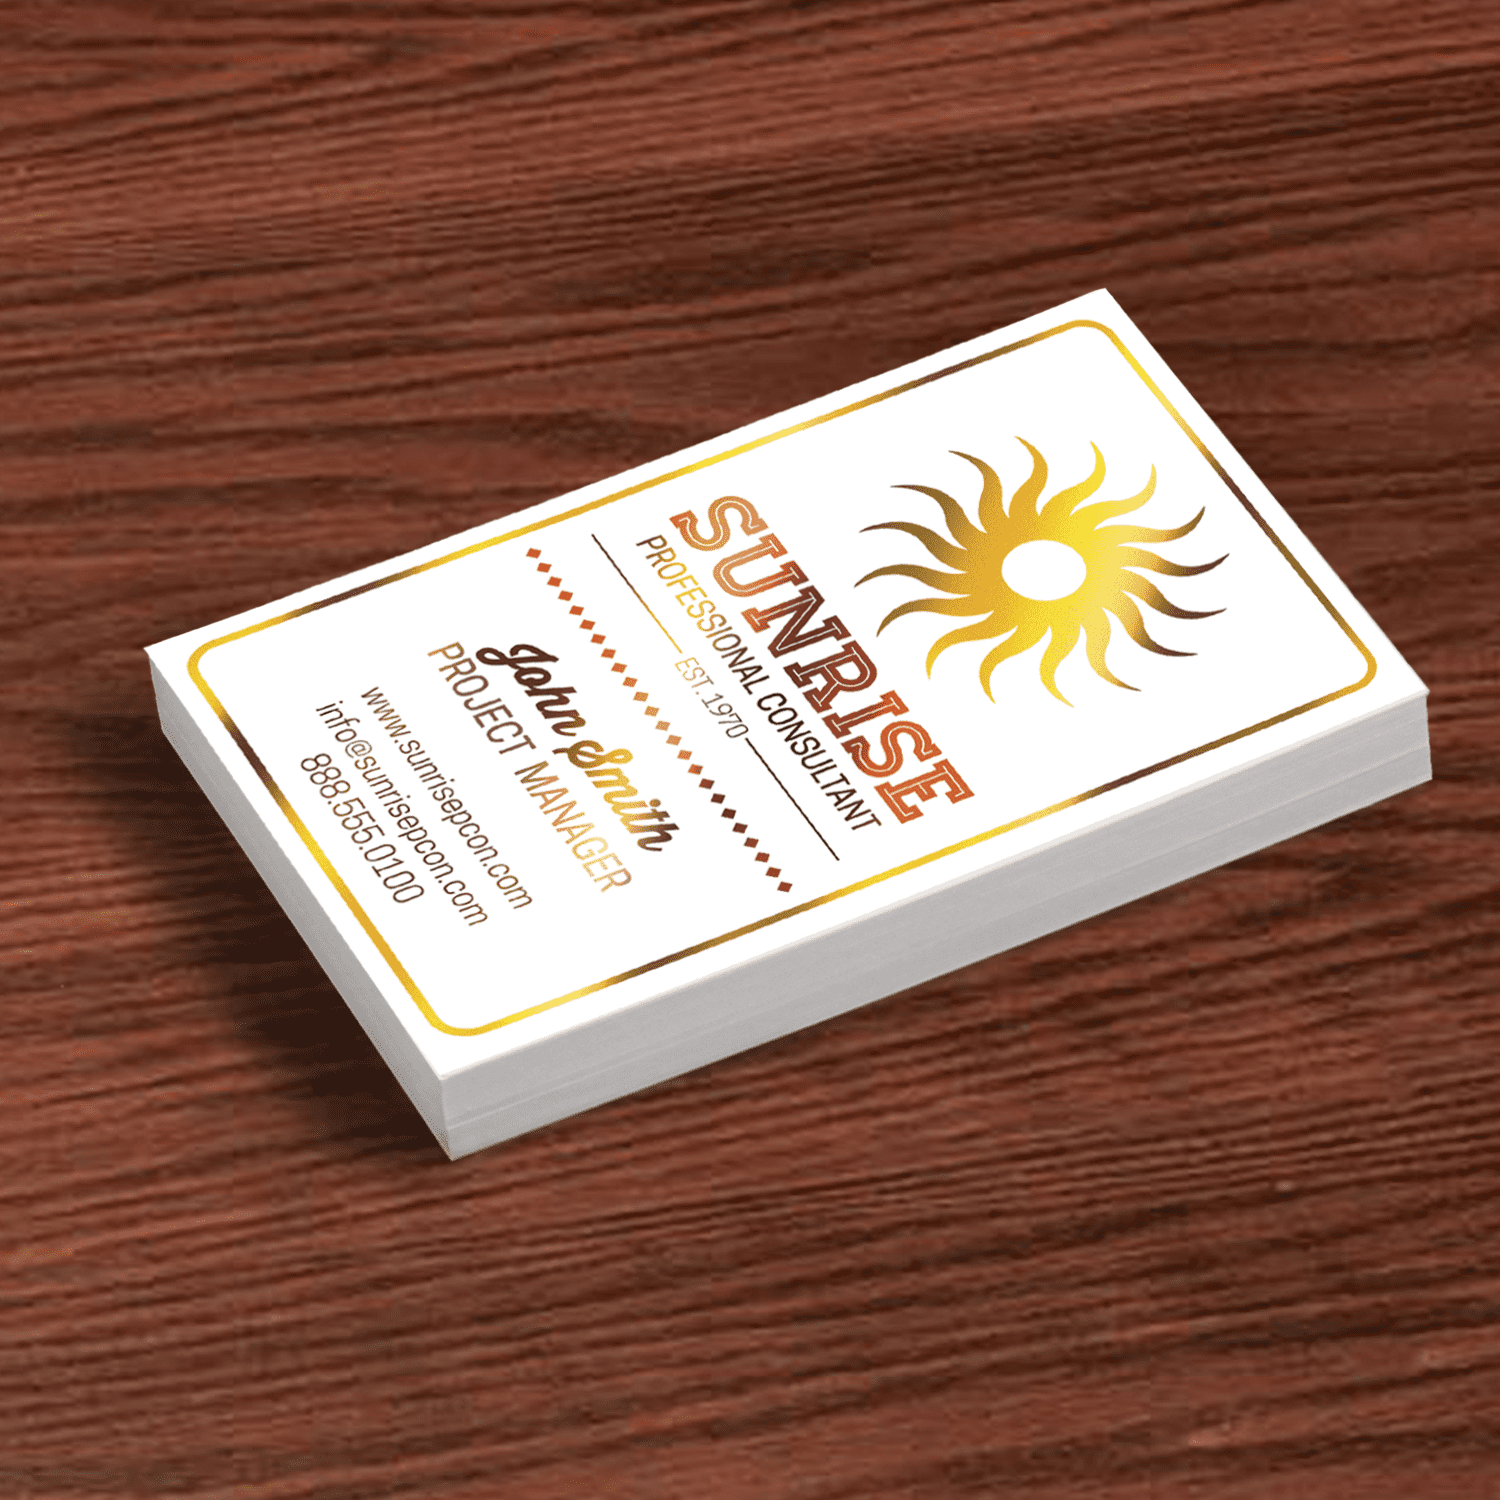 Akuafoil Business Cards